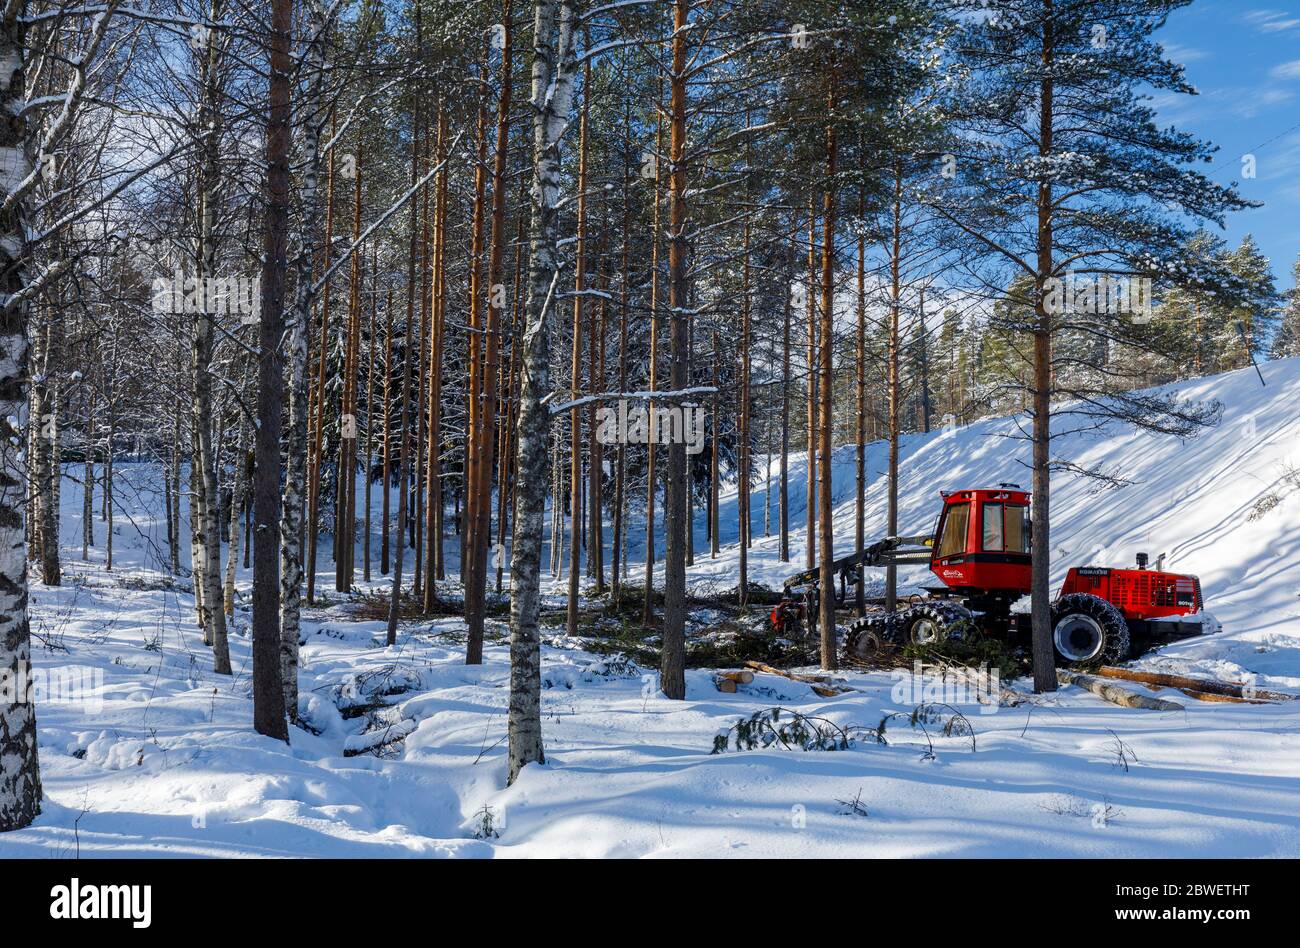 Red Komatsu 901 TX forest harvester thinning young snowy forest at Winter , Finland Stock Photo